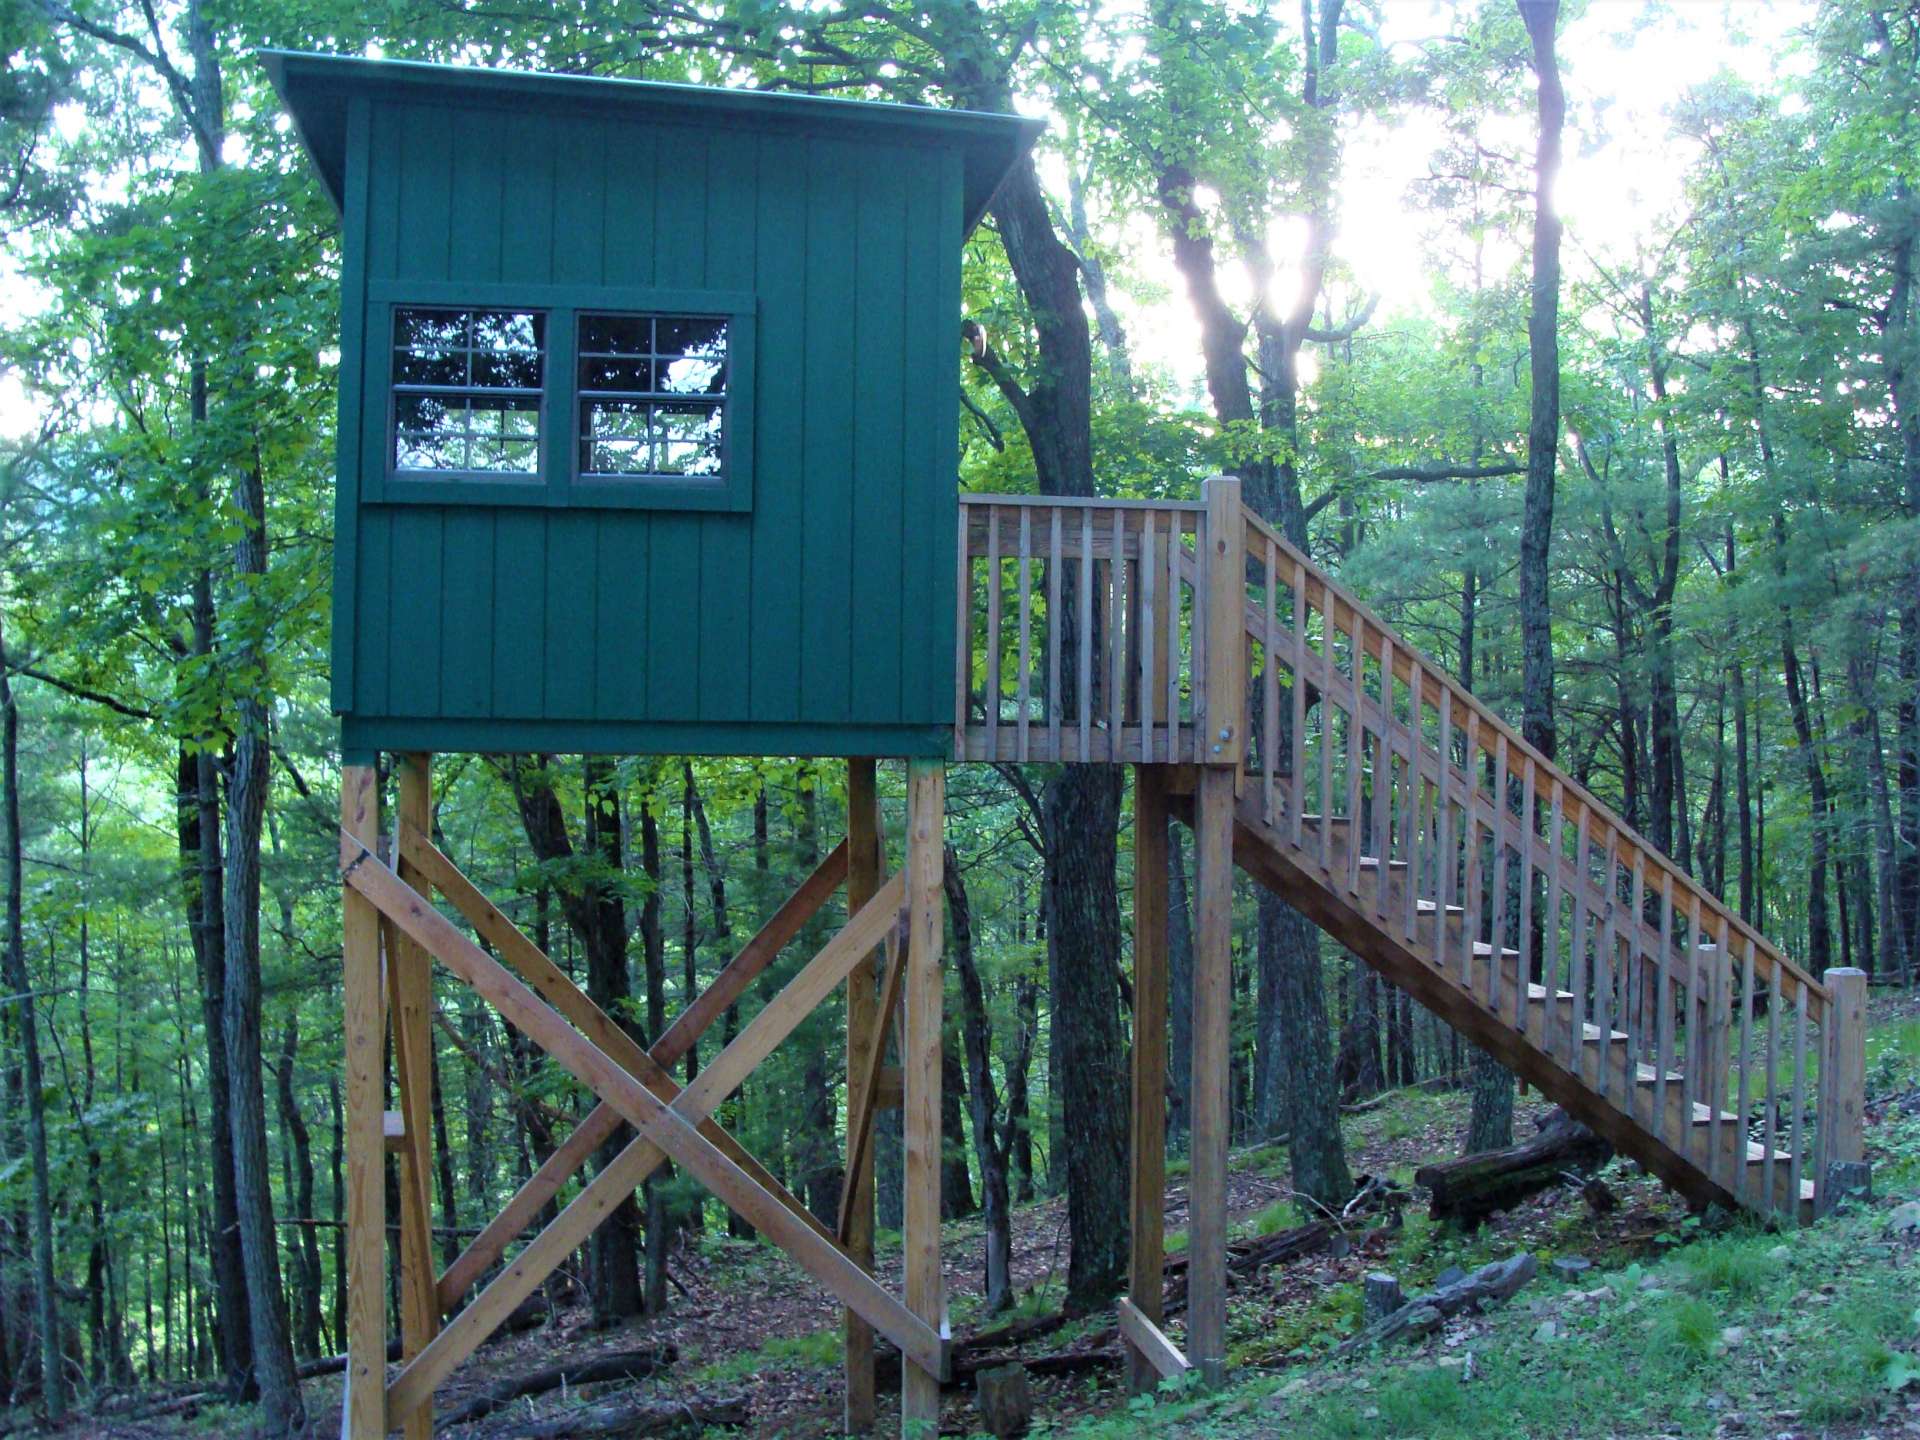 The avid hunter will appreciate this custom deer observation tower. This structure is also perfect for a child's tree house.